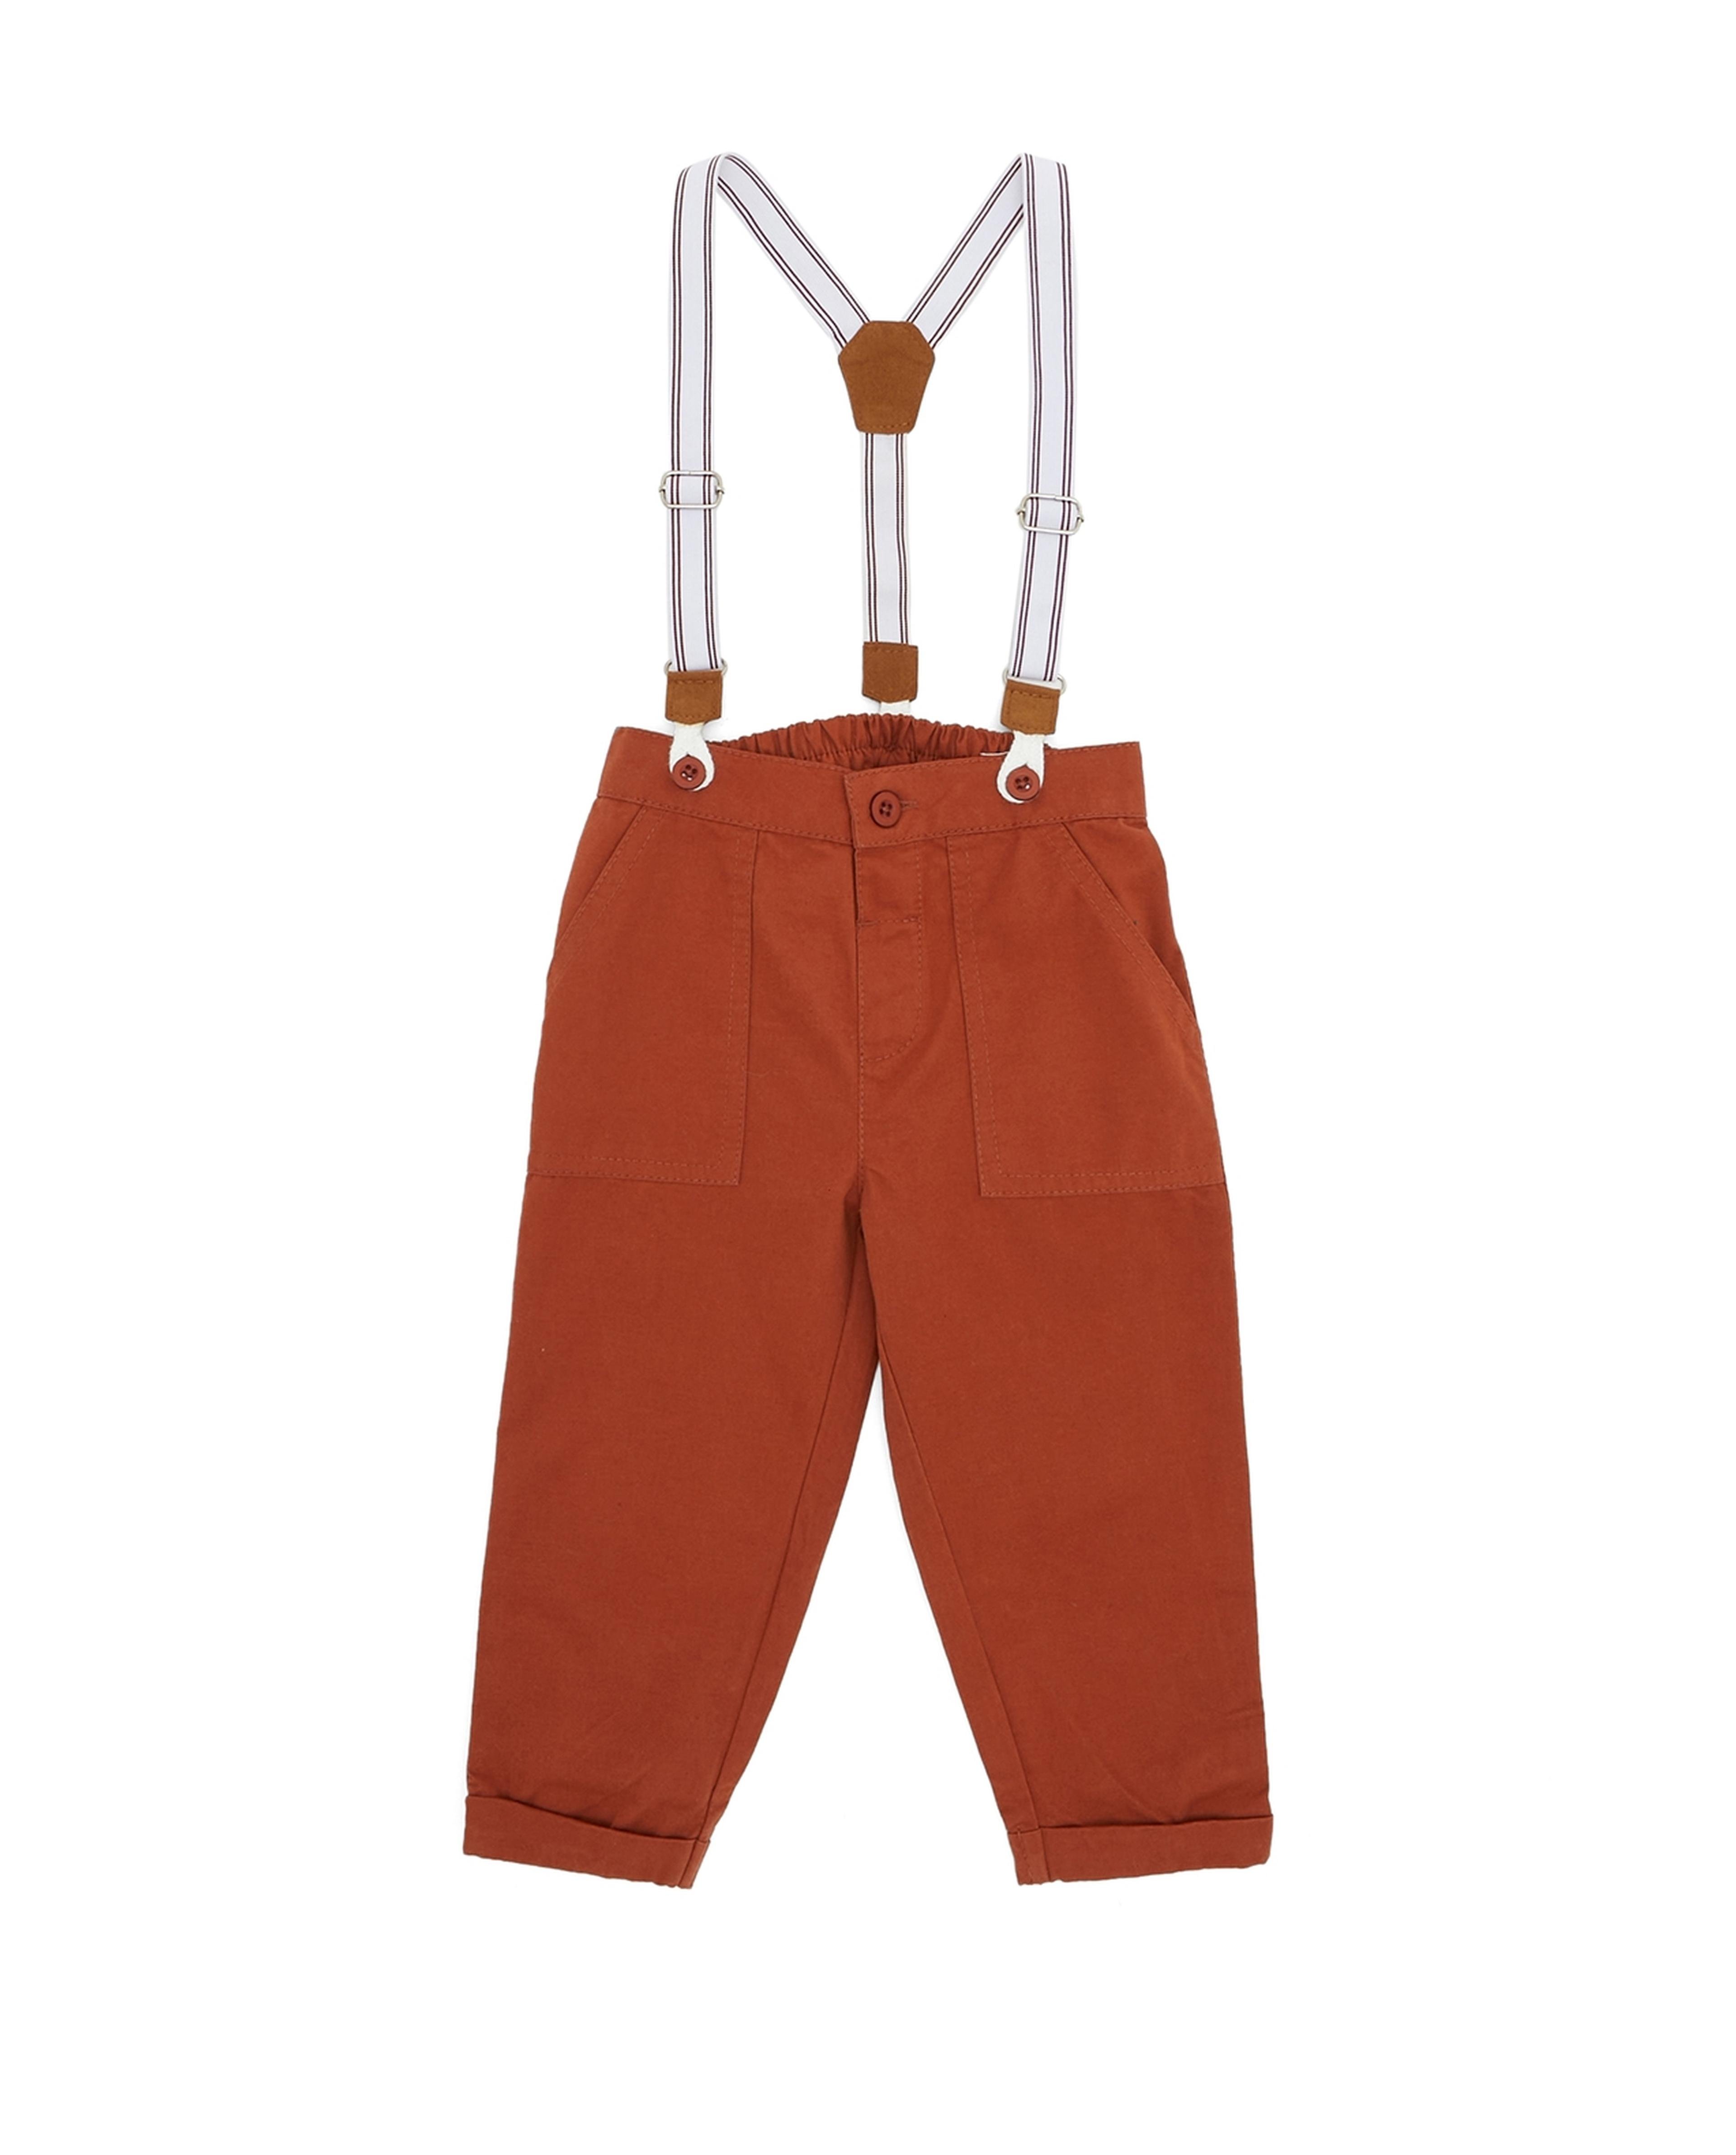 Solid Clothing Set with Suspenders